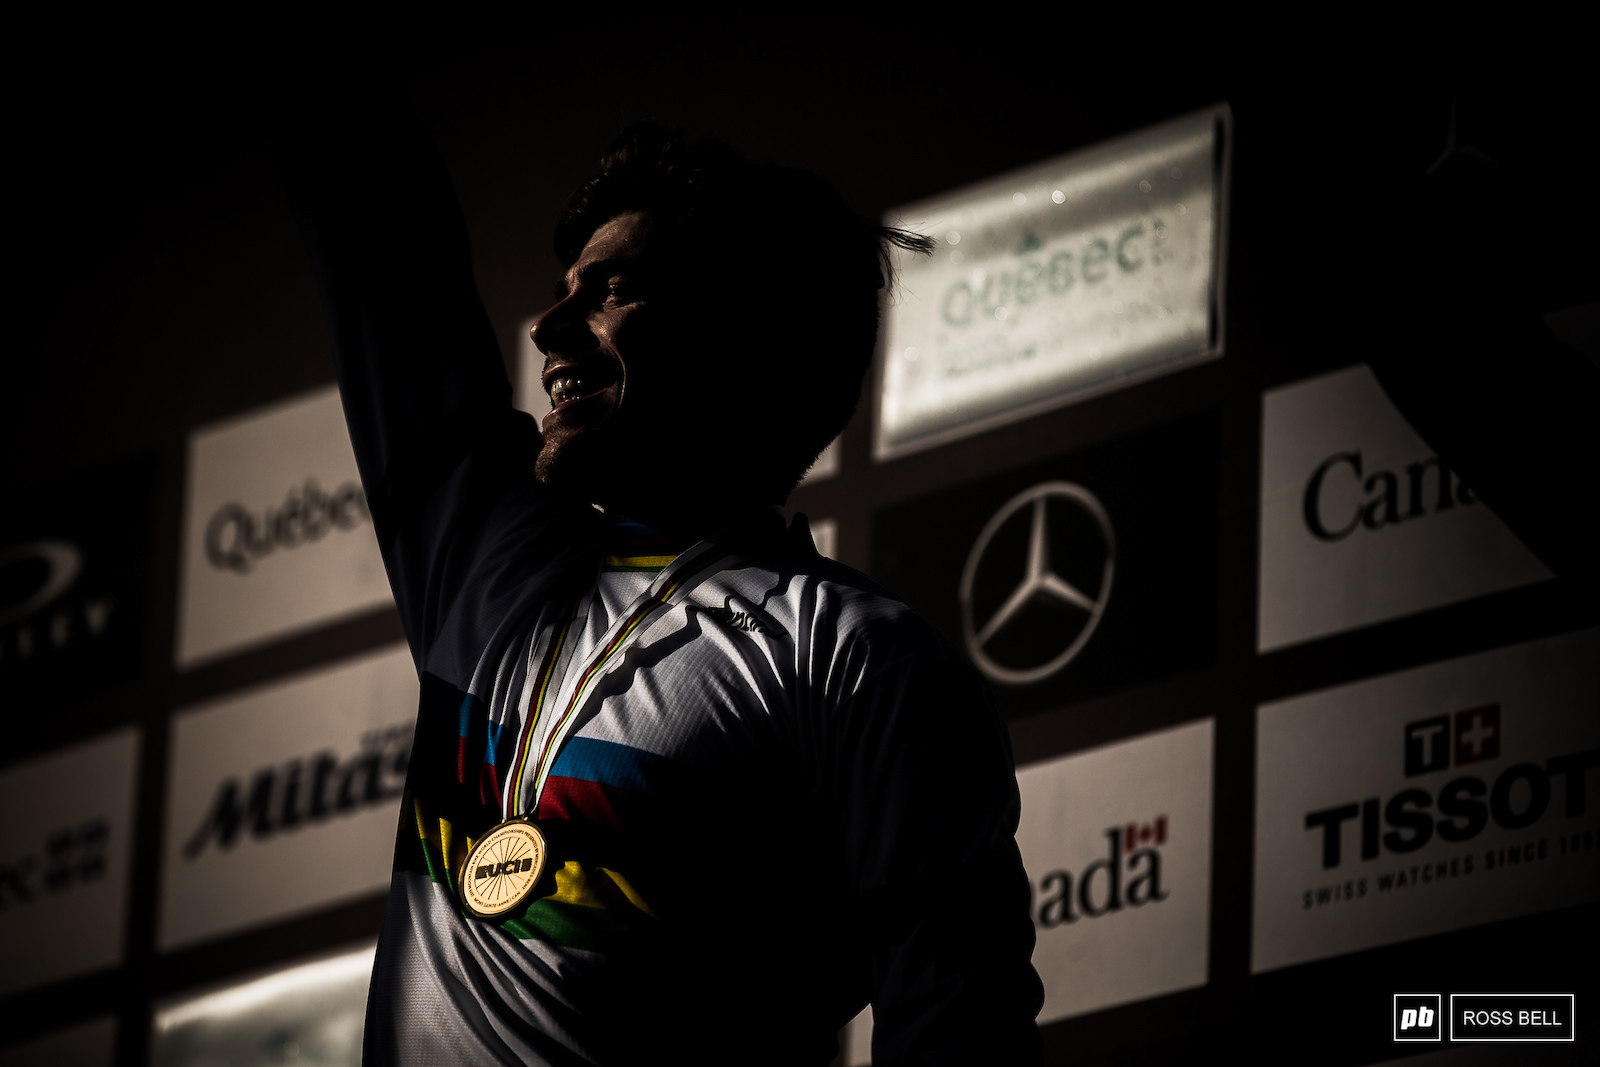 3 consecutive gold medals for Loic Bruni at World Champs. This race seem to bring out the best in him.